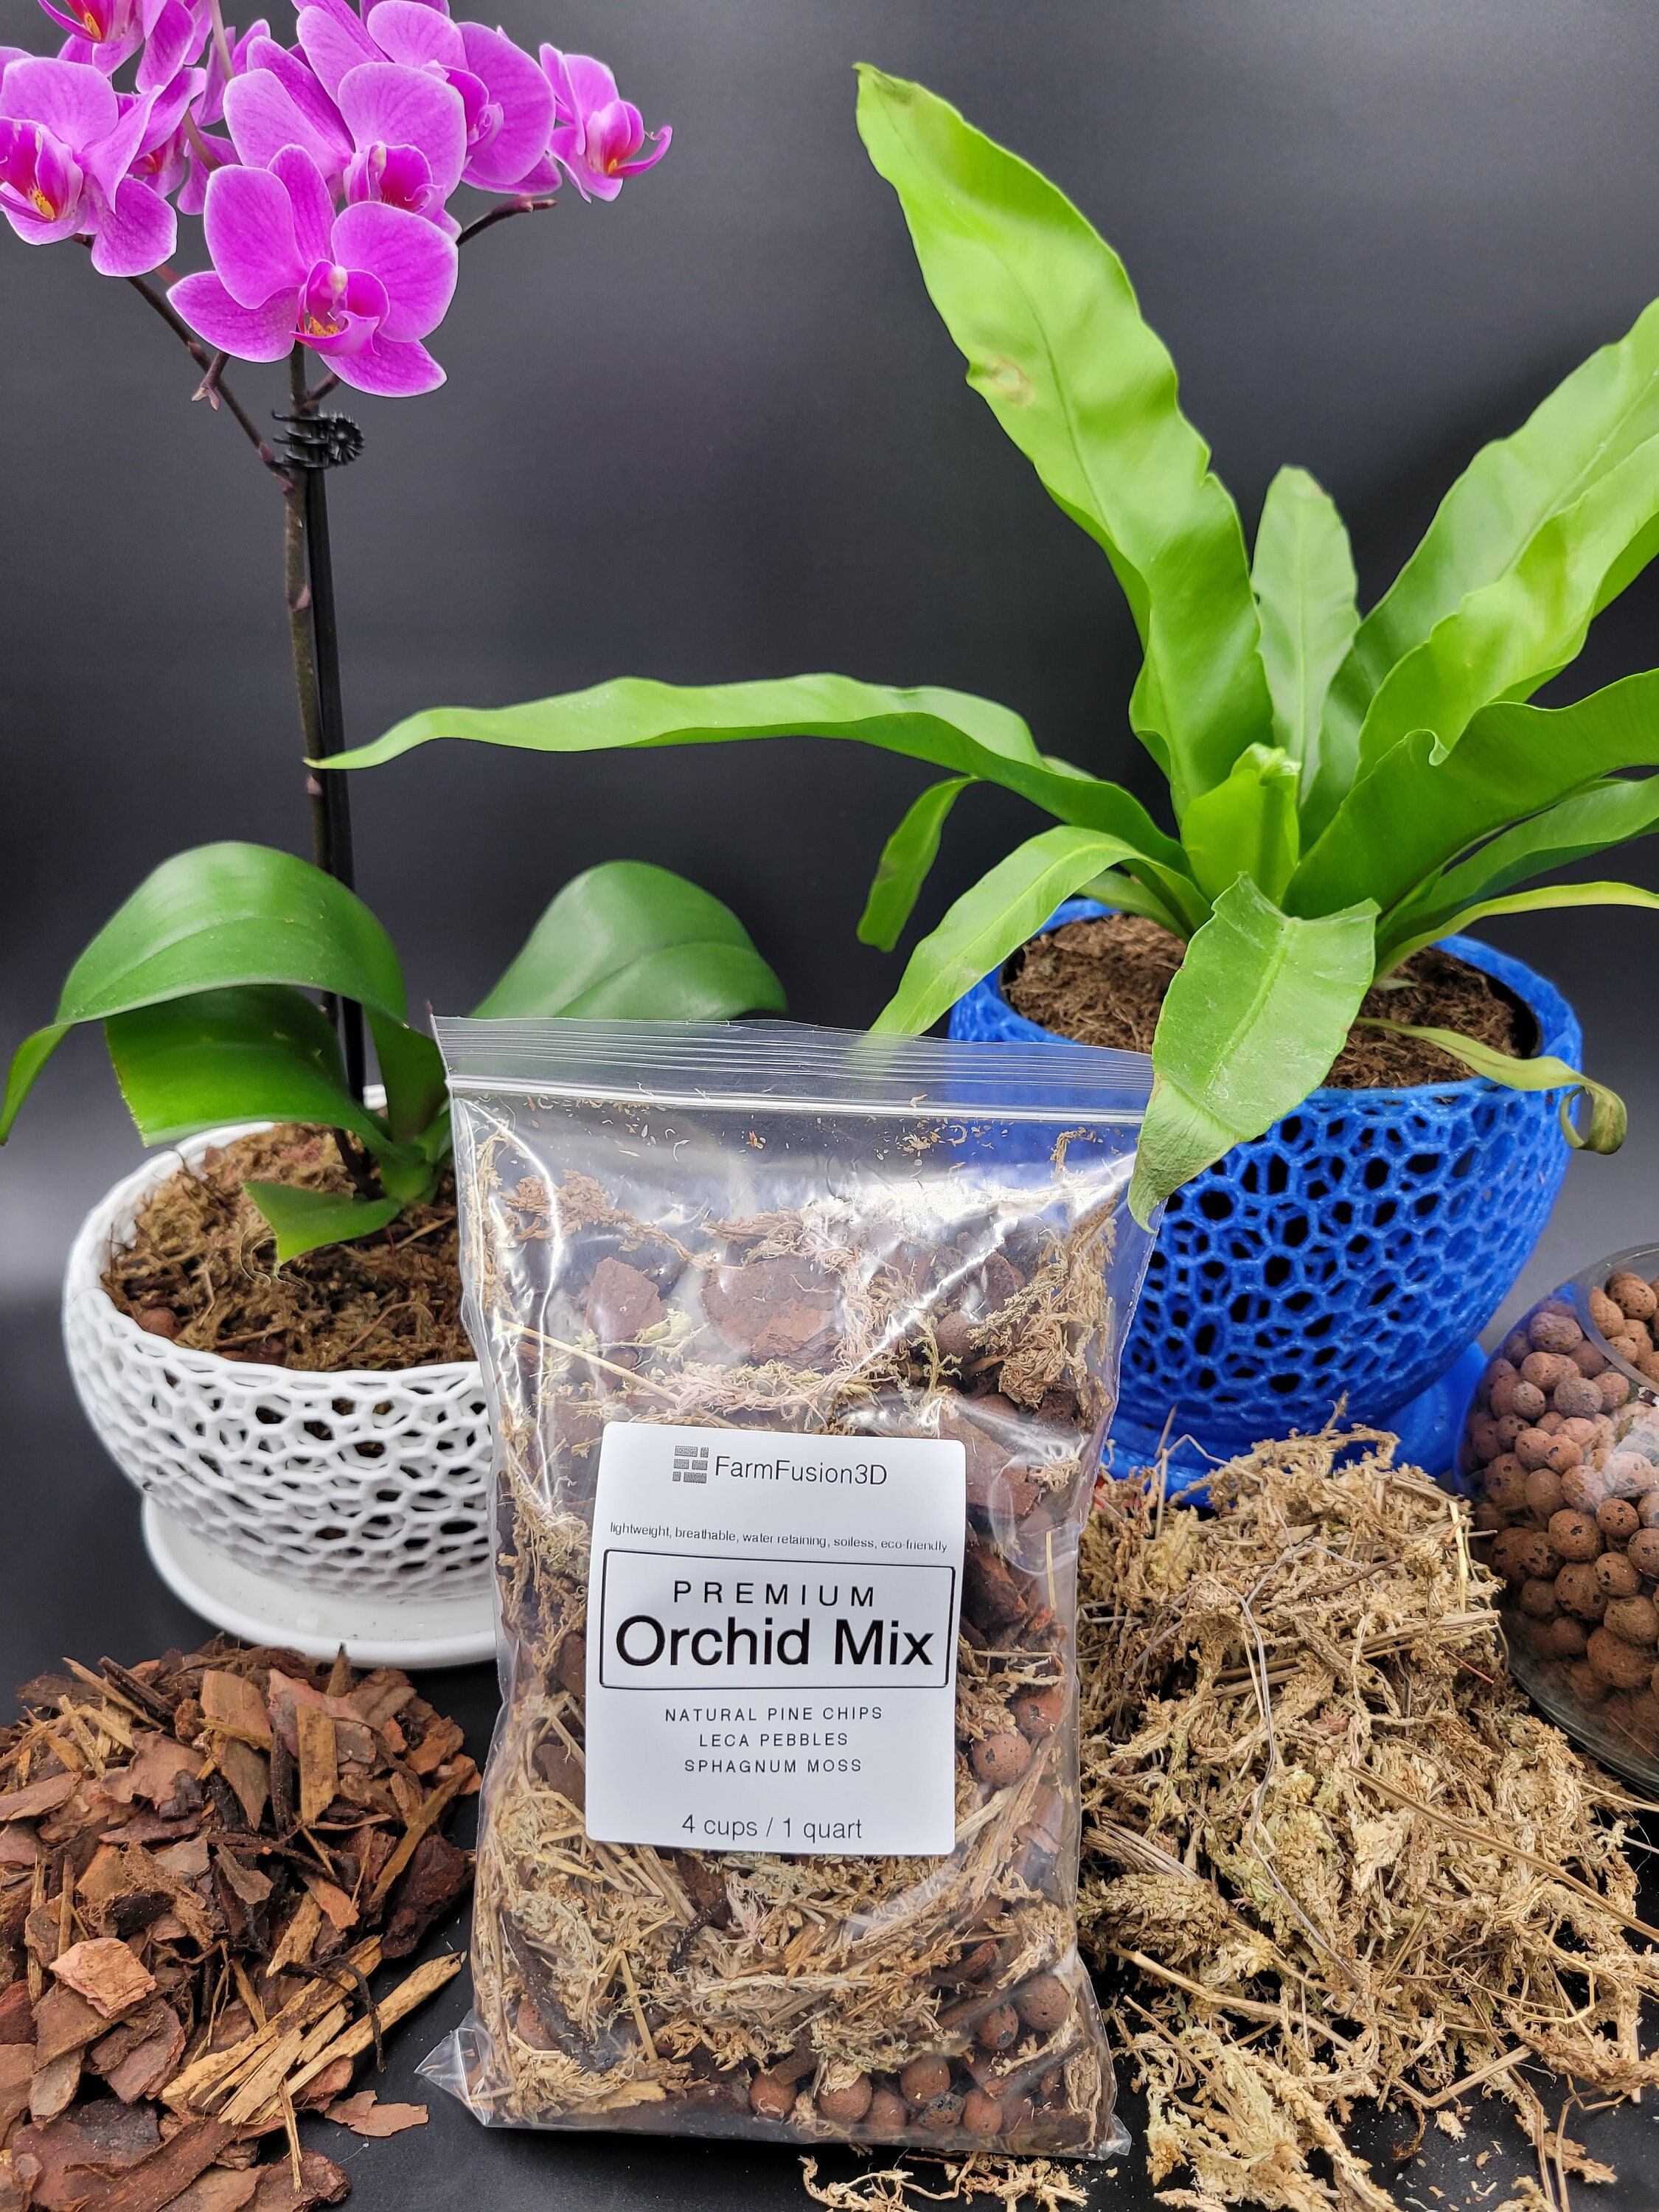 Cloflo Horticultural Charcoal for Indoor Plants Soil Amendment for Orchids,  Terrariums, and Gardening 1-5 Qt 